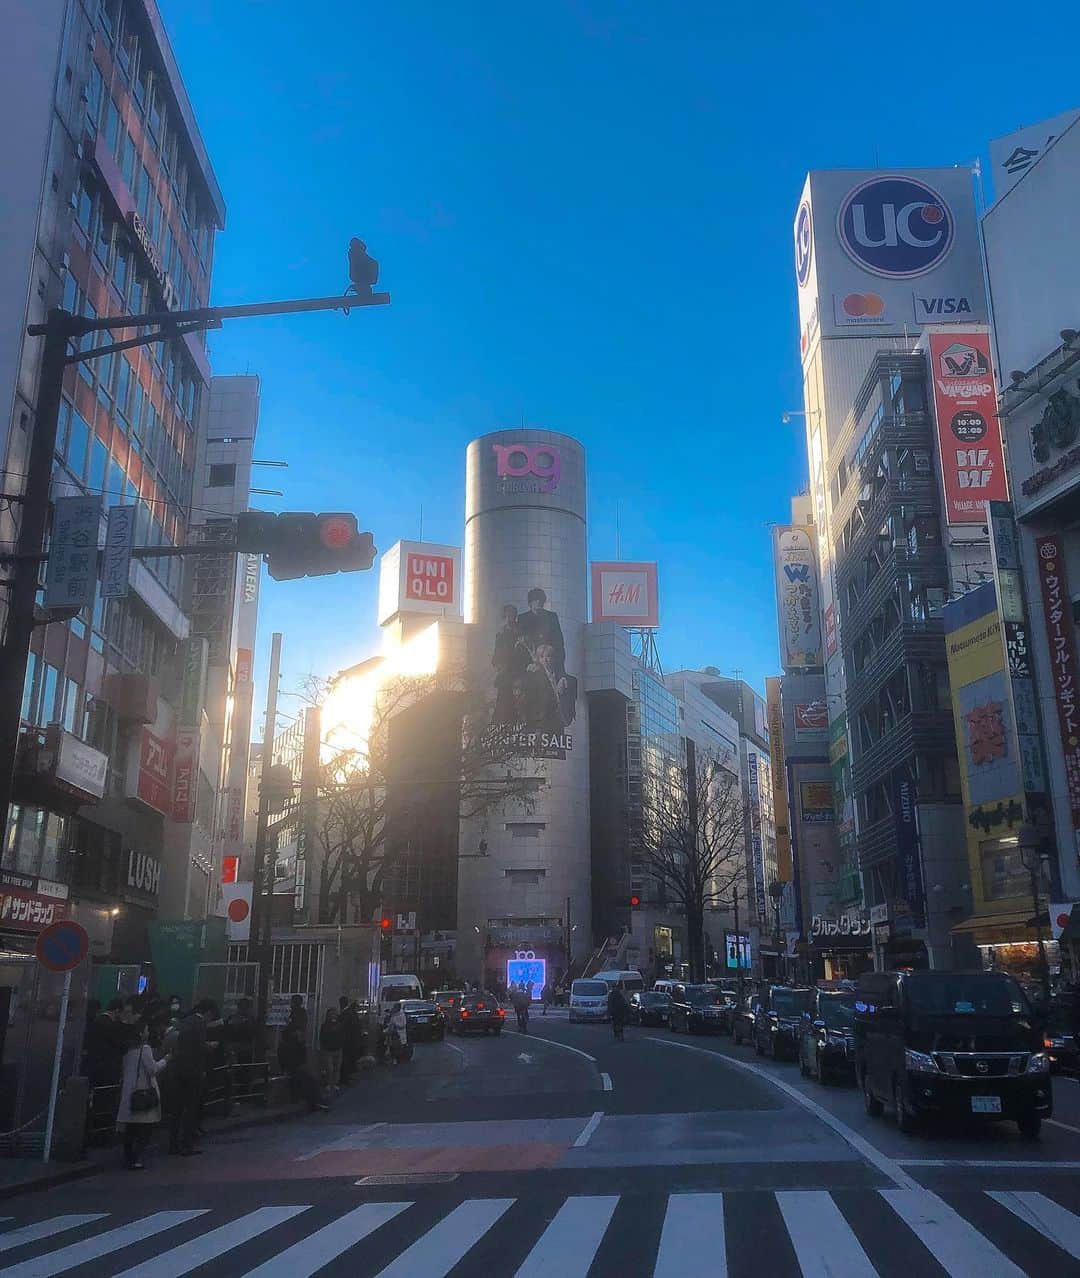 Jade Furutaのインスタグラム：「I had half a second to take this picture, right when the light was about to turn red, and I did!🙌🏽 We can keep this thinking for other things too❤️ move fast, take the risk & grab your chance while it’s there💋 #shibuyasky #shibuyacrossing #takerisks  . . . . . . . . . . . . . . . . . . . . . . . . . . . #観光インフルエンサー #インフルエンサー #インスタグラマー #インスタグラマーズジャパン #igersjp #nikejapan #lifeintokyo #tokyo2021　#tokyostreetphotography #tokyoolympics #tokyoolympics2021 #tokyotourism #visitjapan #travelinfluencers #shibuyasunset #shibuyastreet #iphone8photo #influencerjapan」